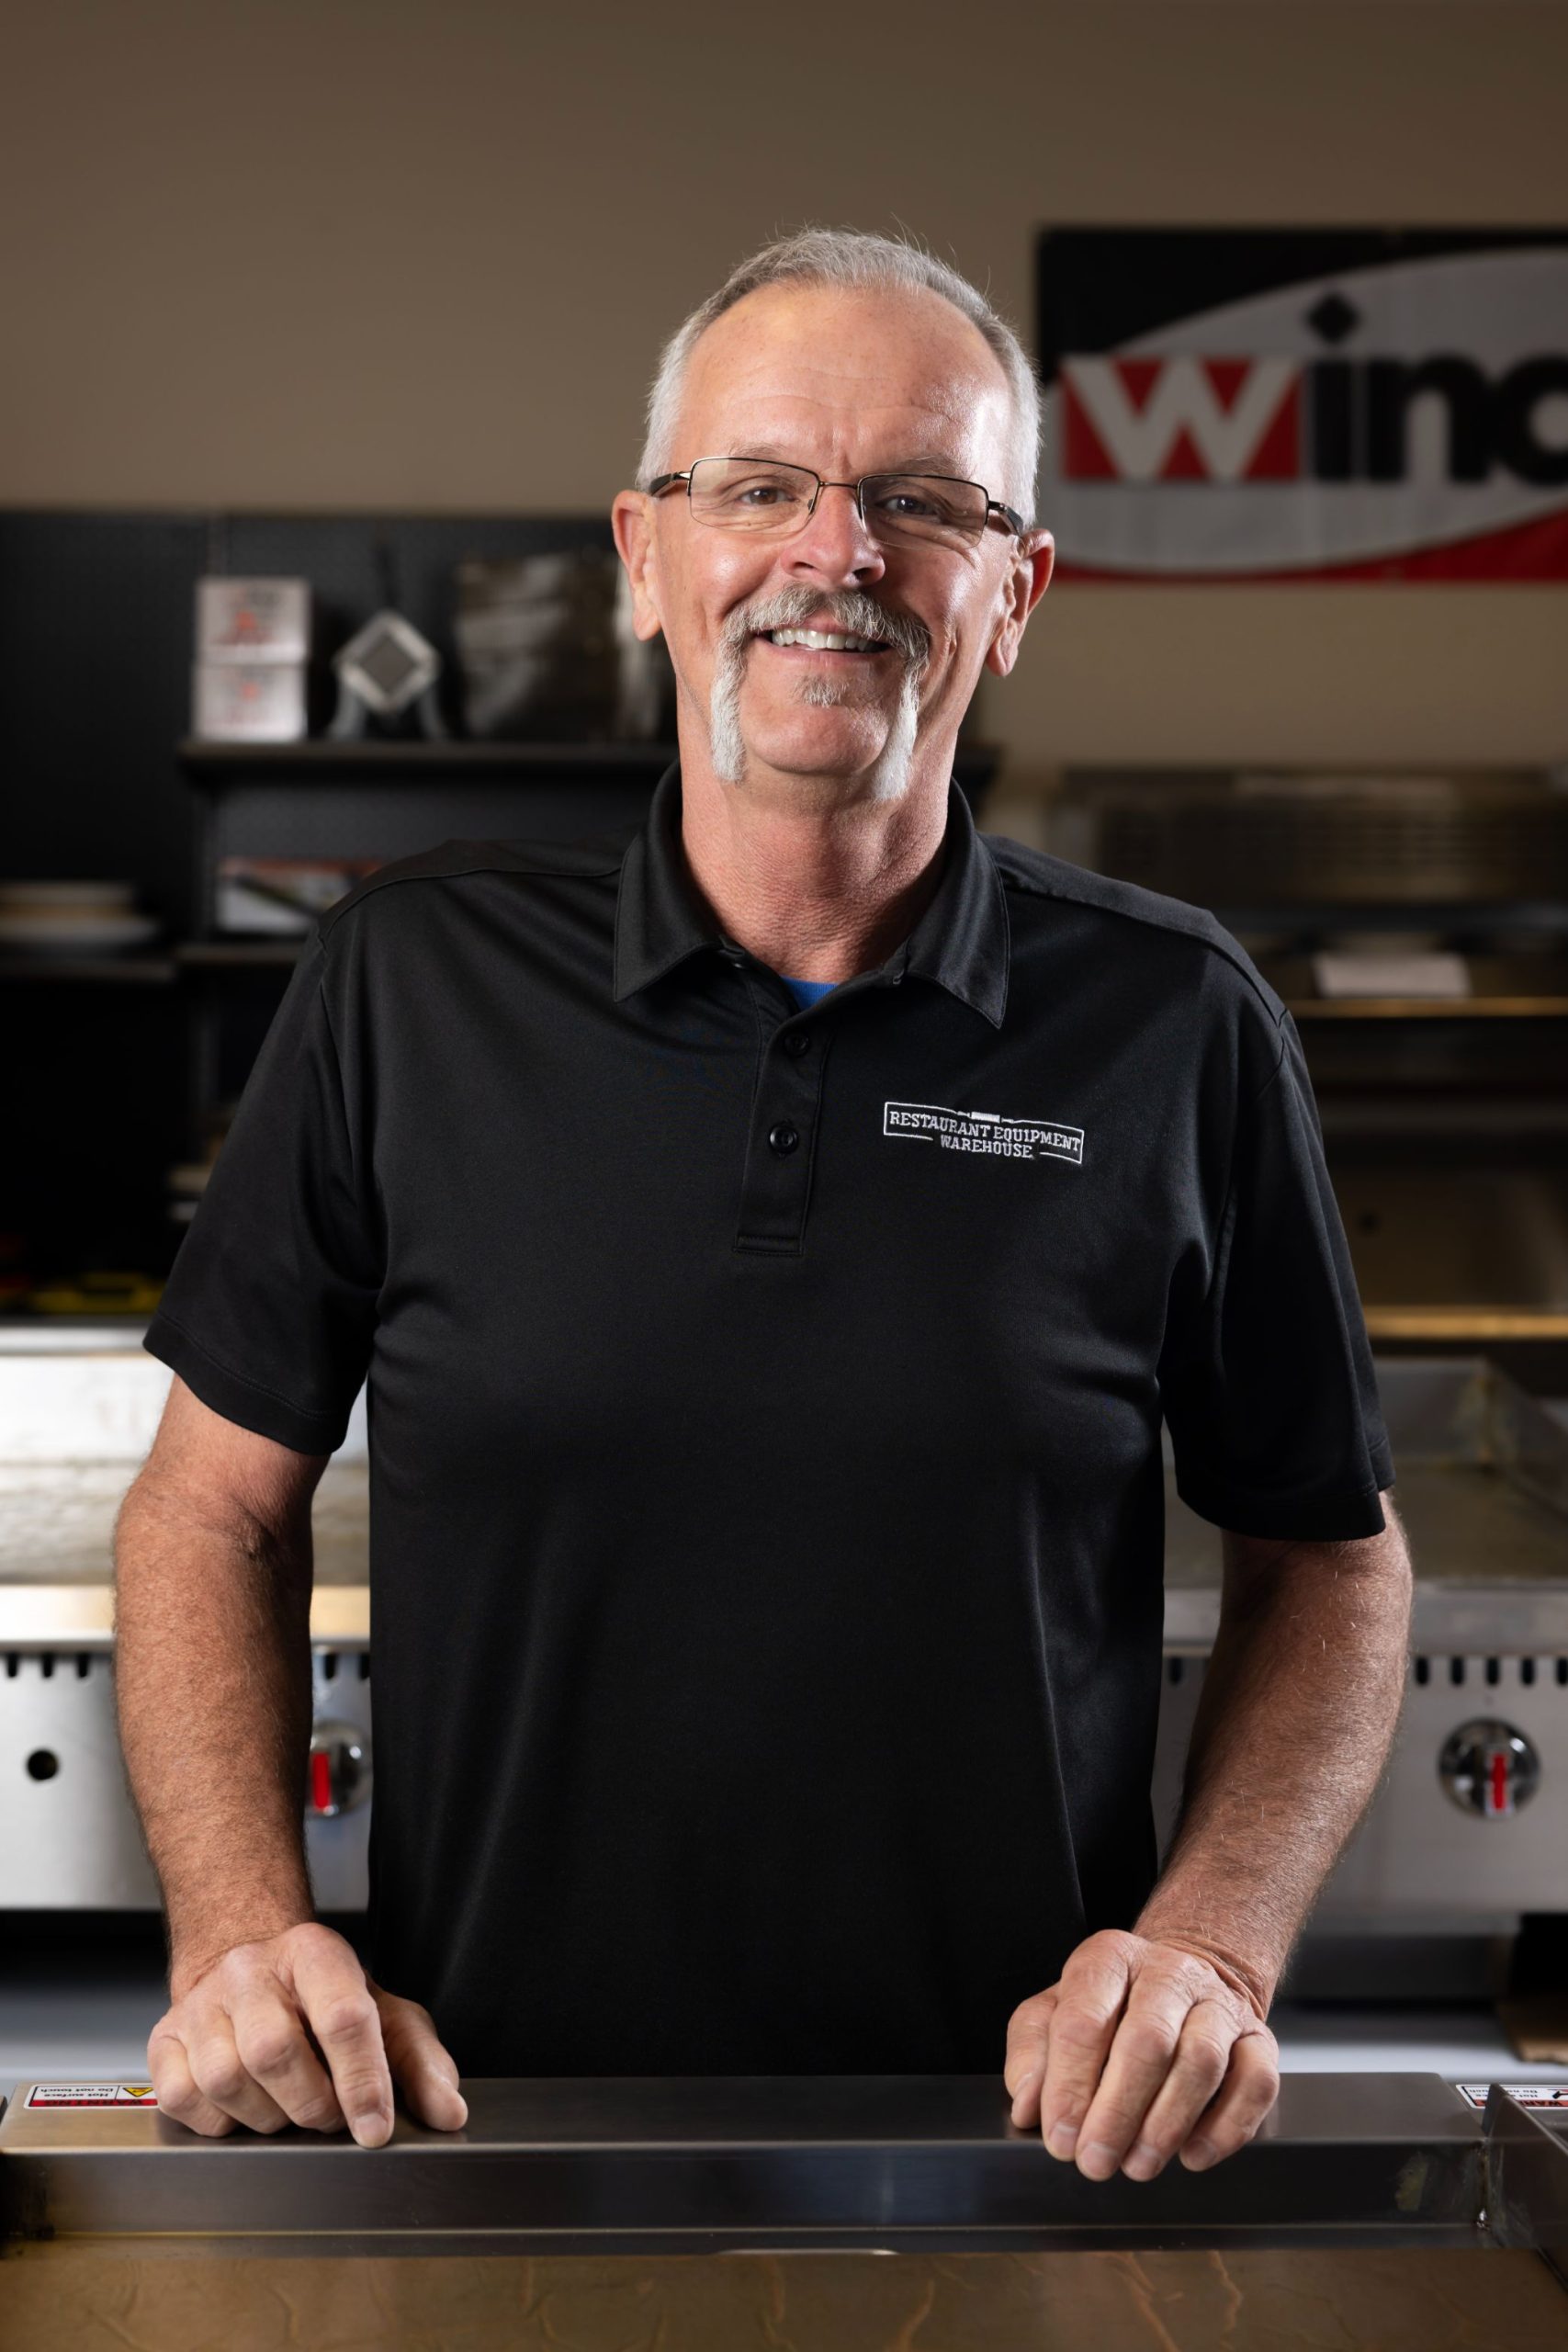 Anthony is one of our Managing Members. He brings 35 years of experience in the restaurant industry! He believes in customer satisfaction and excellent service results.